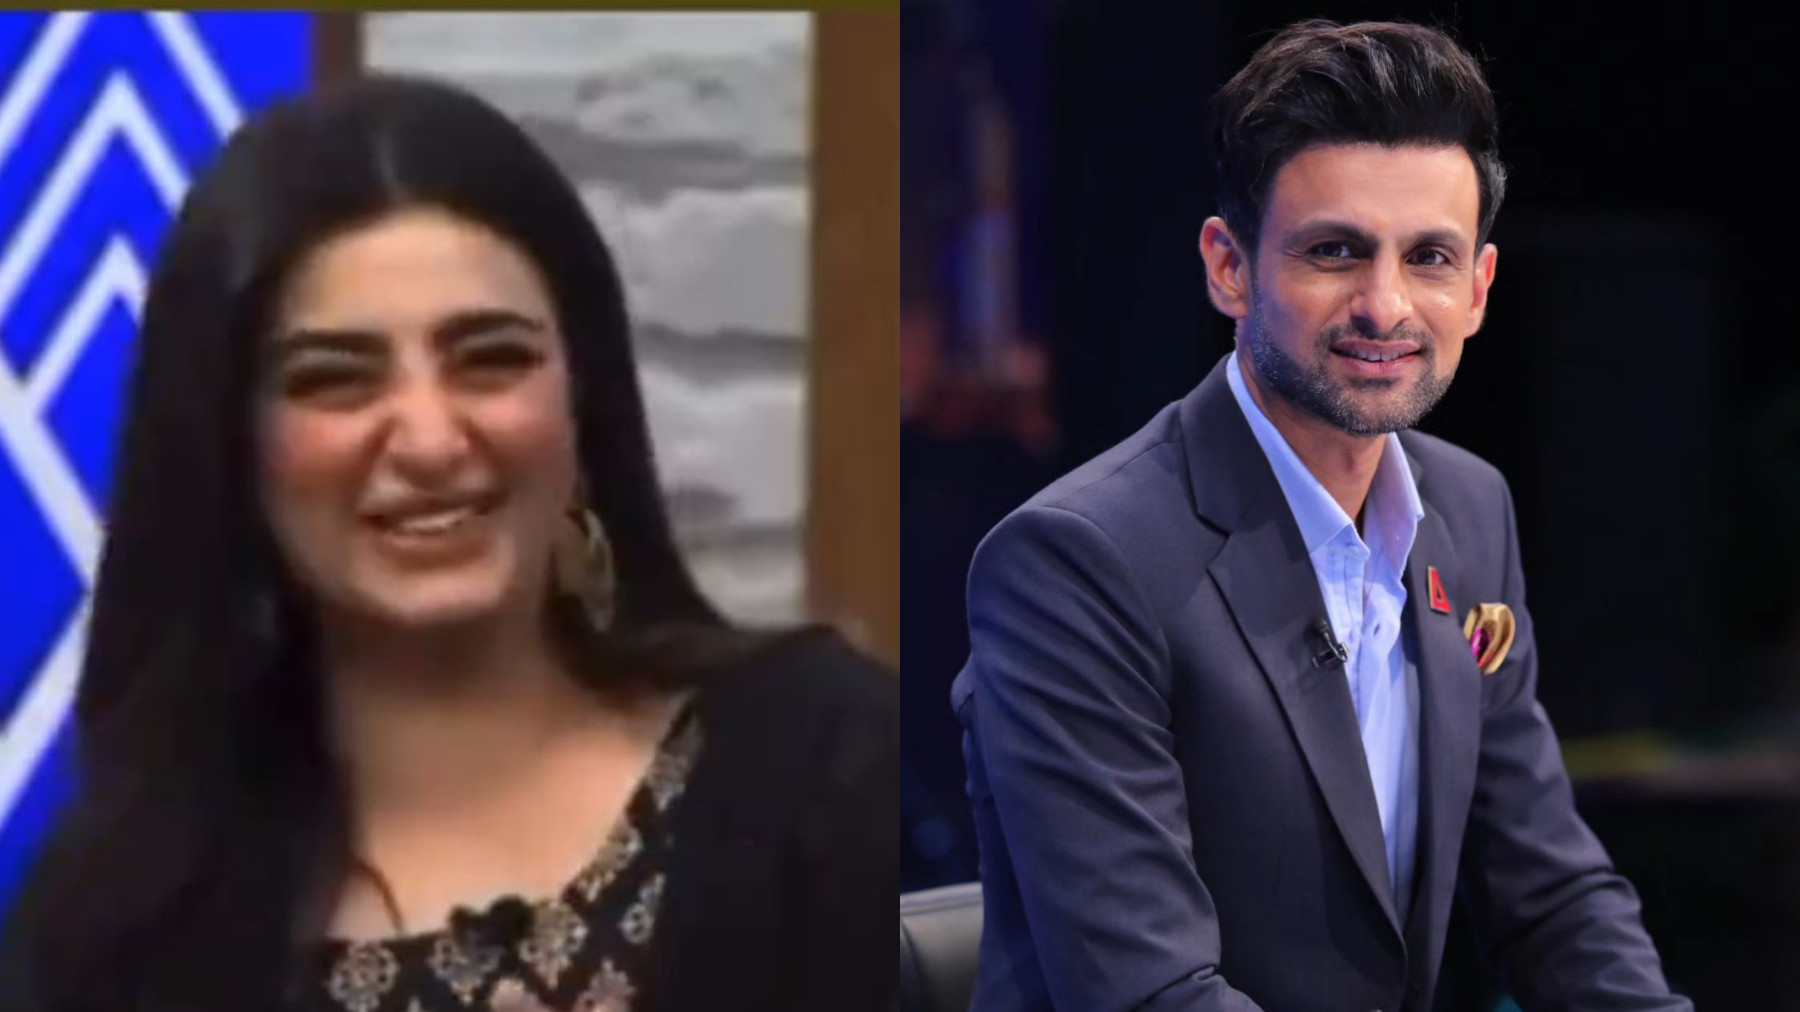 WATCH- Did Shoaib Malik send flirty DMs on Instagram to actress Nawal Saeed? Here is the truth